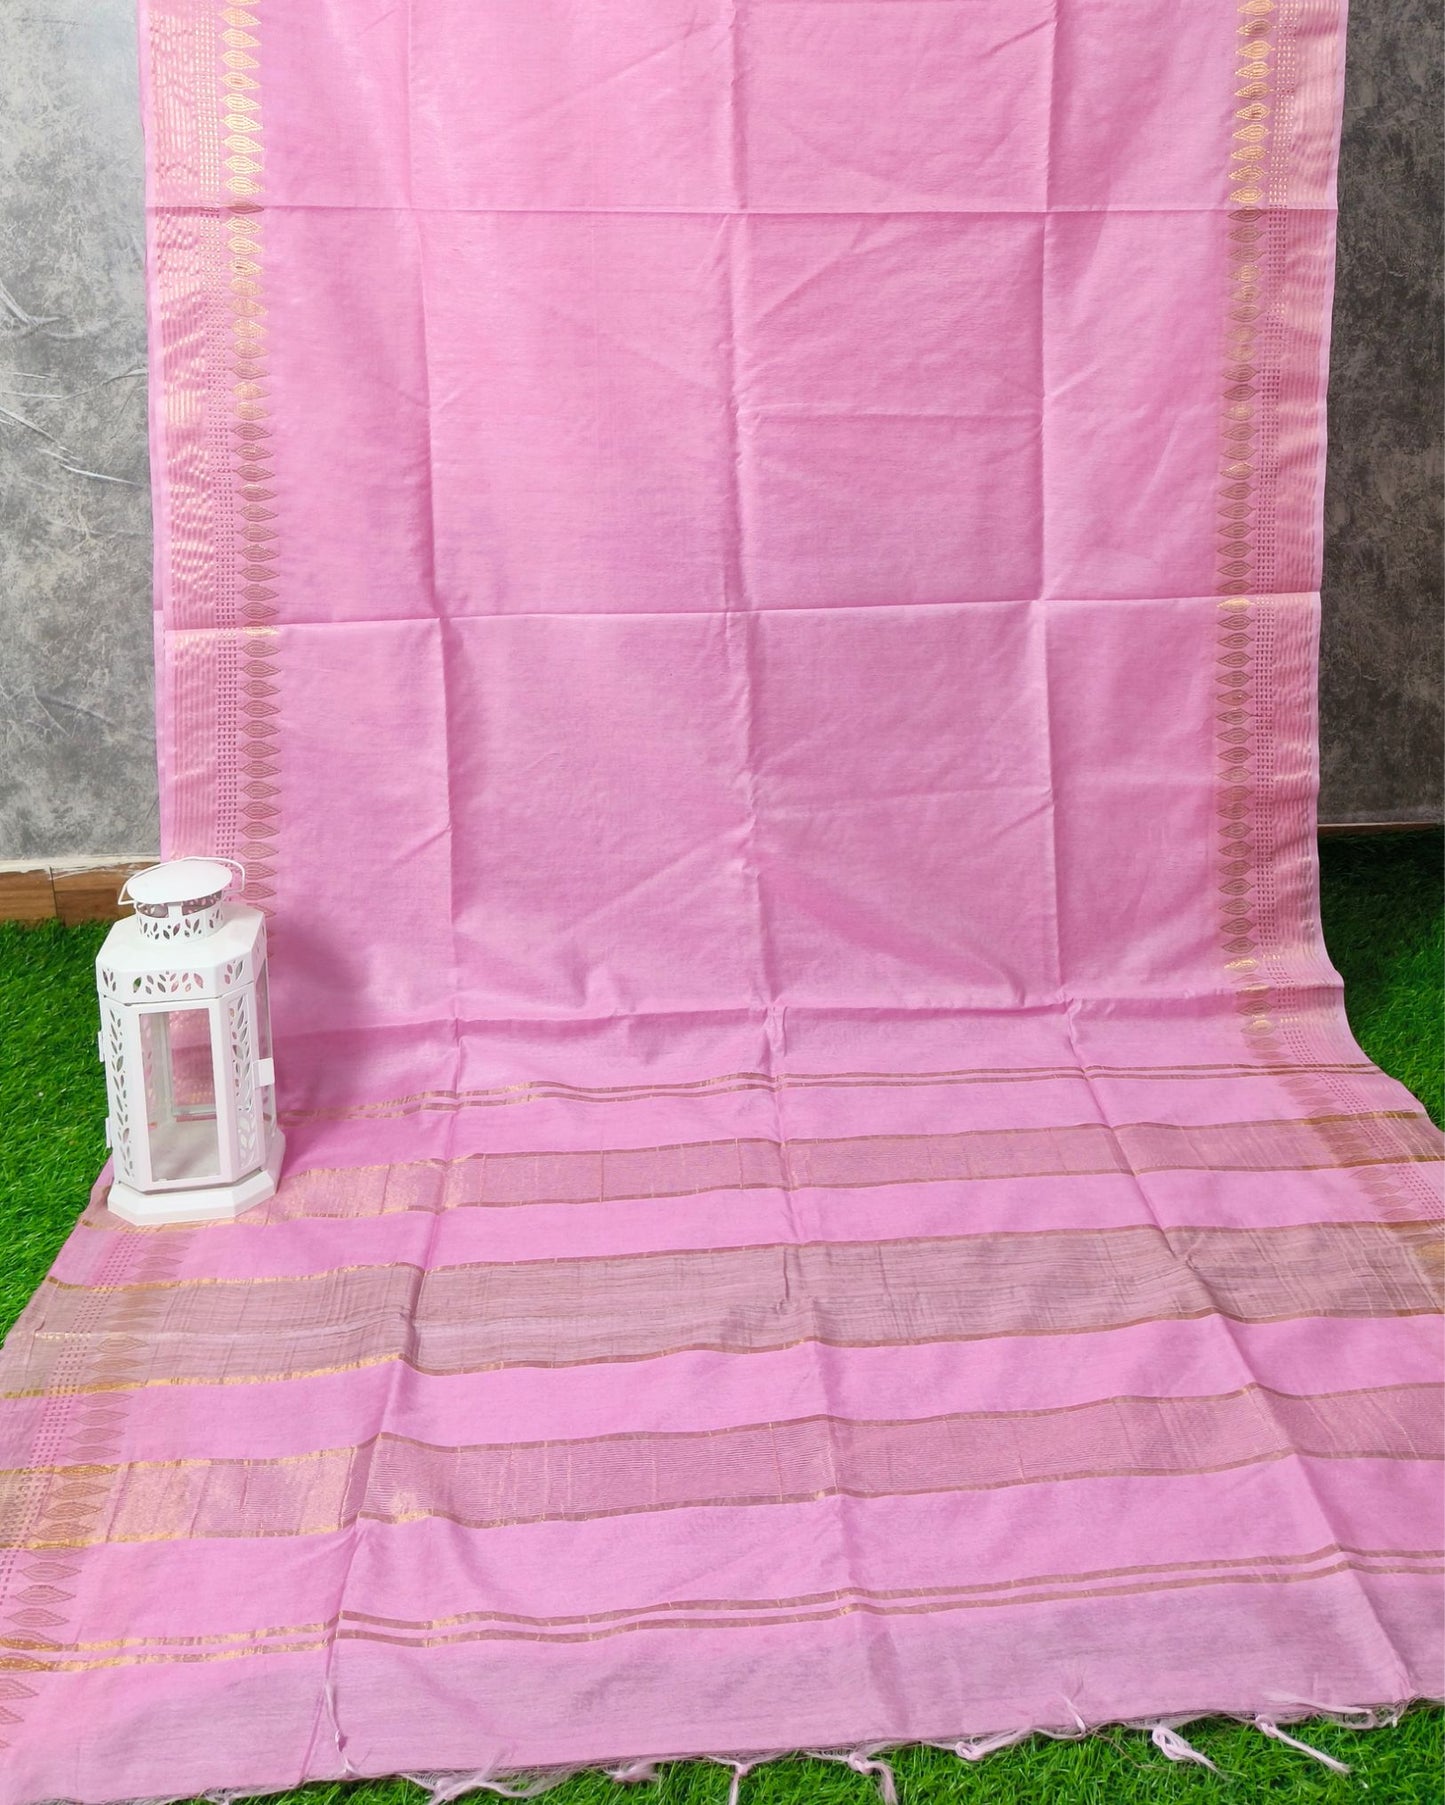 3498-Handcrafted Kota Silk Pink Saree Jacquard Weaves with Blouse